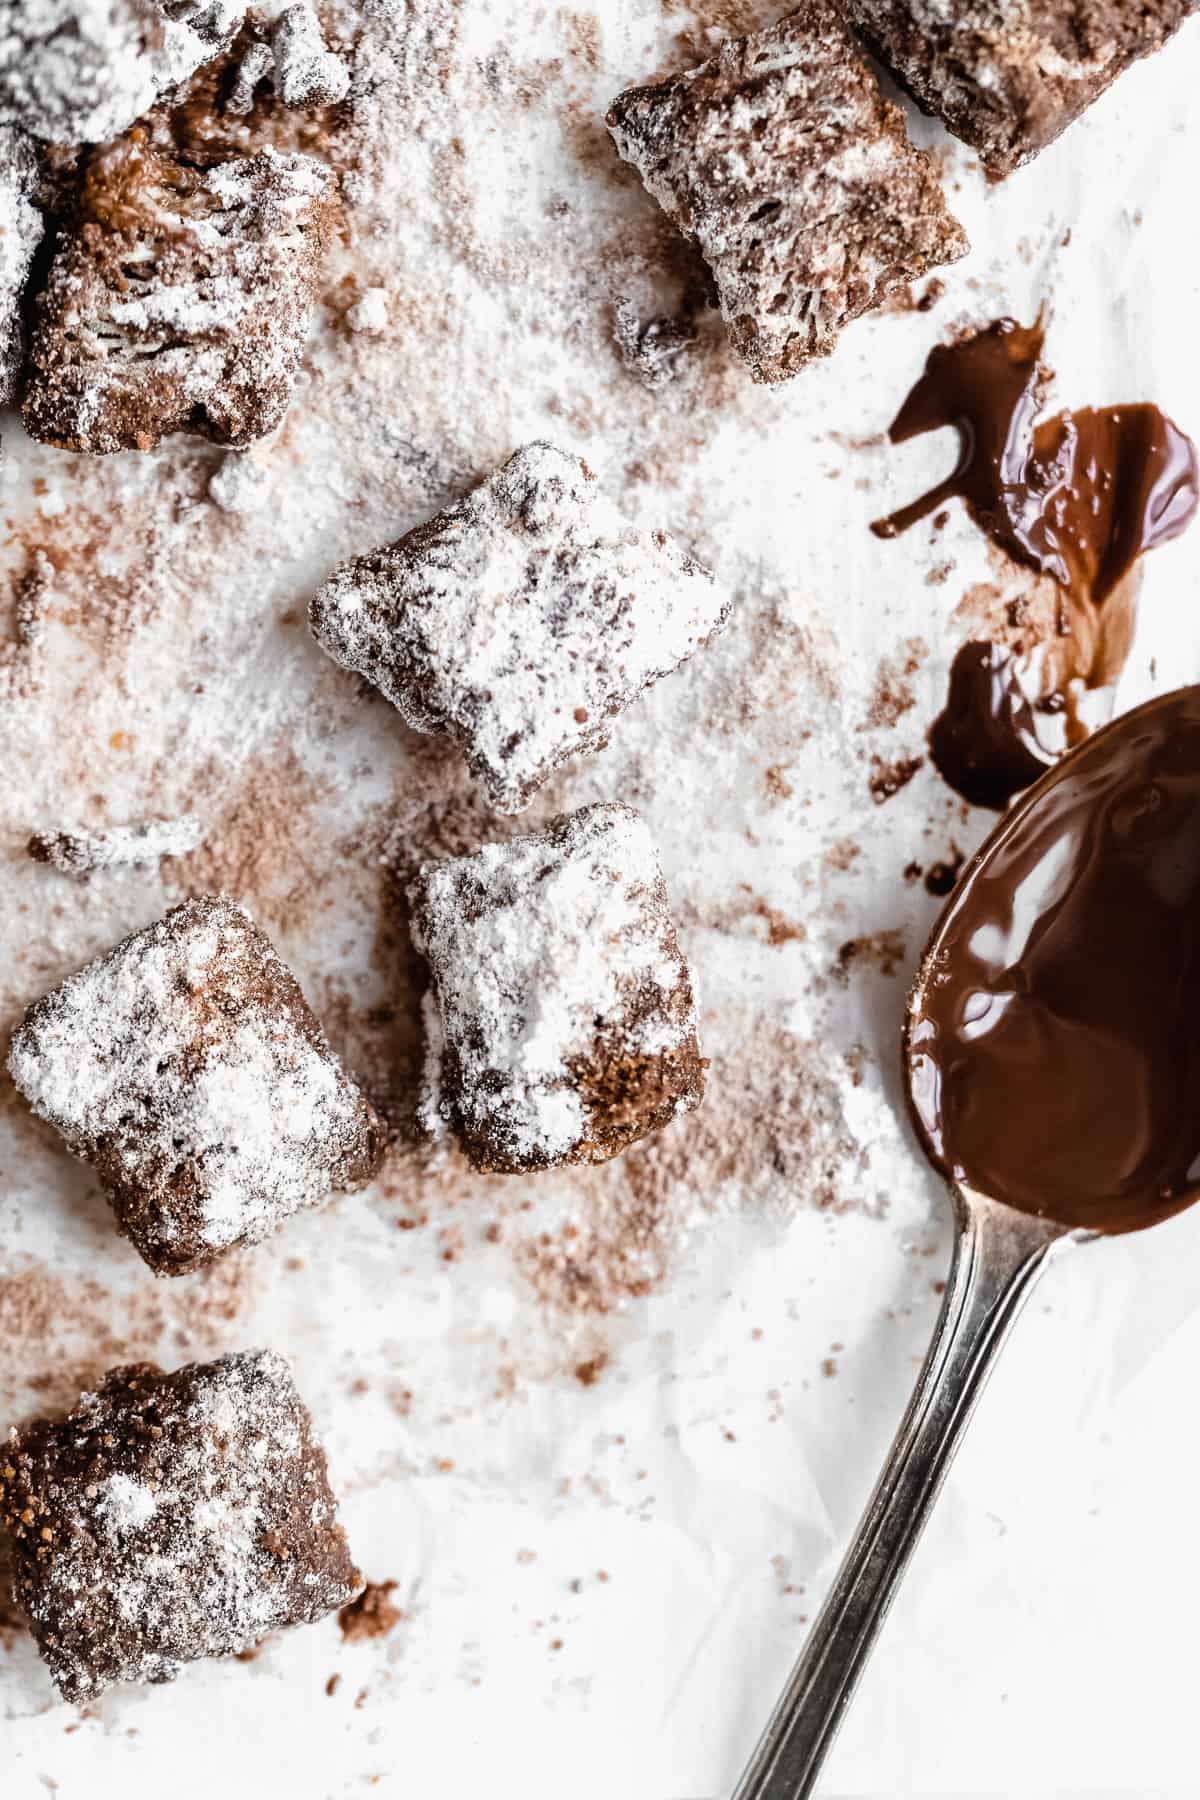 Closeup photo of Healthy Puppy Chow pieces on white parchment paper.  A silver spoon with melted chocolate sauce is laying nearby.  